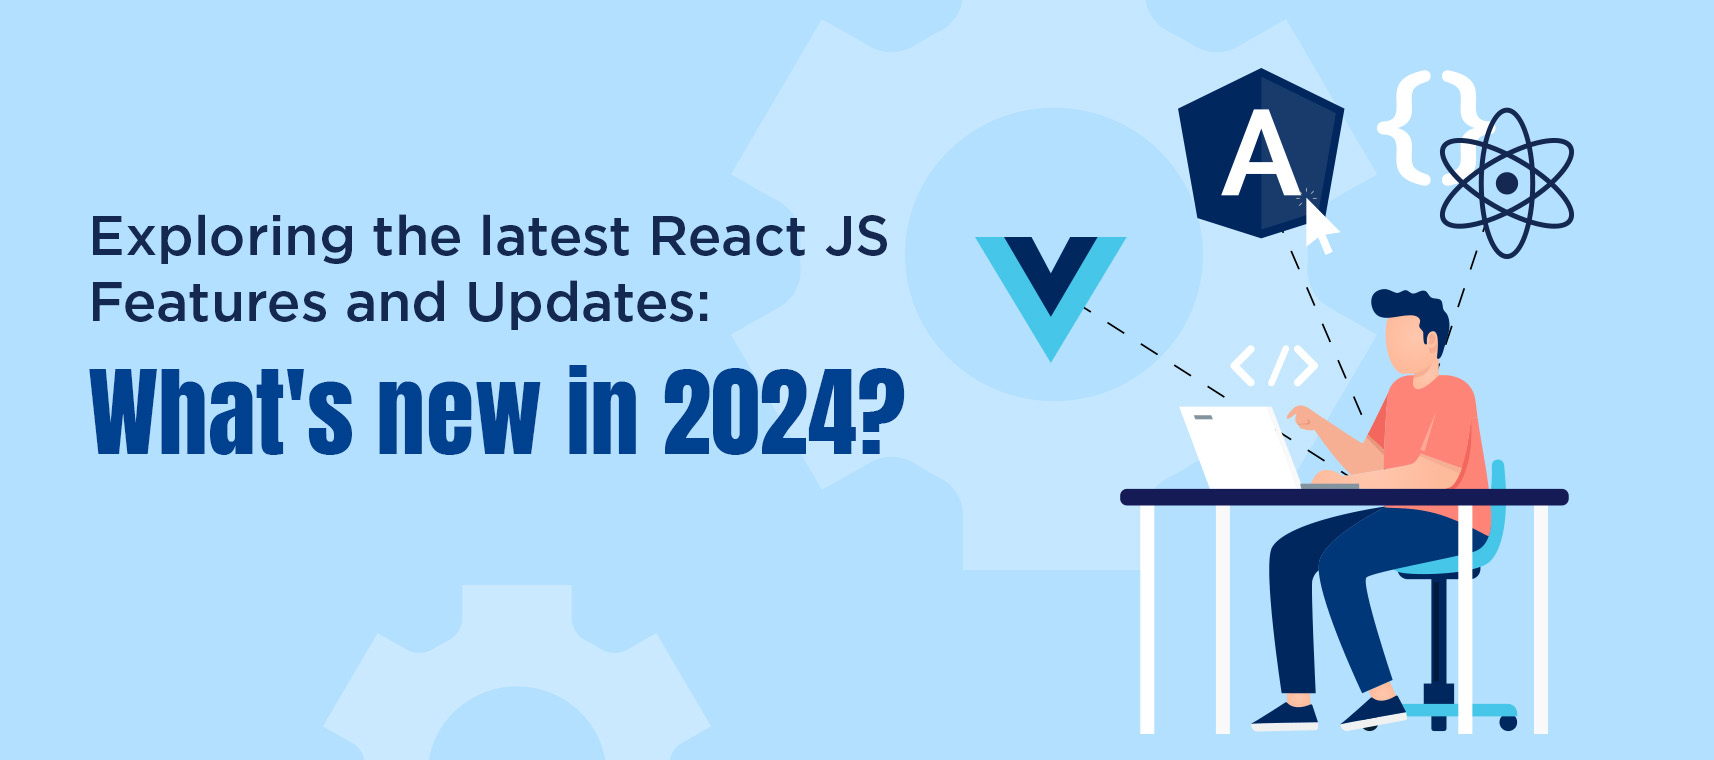 Exploring the Latest React JS Features and Updates: What's New in 2024?